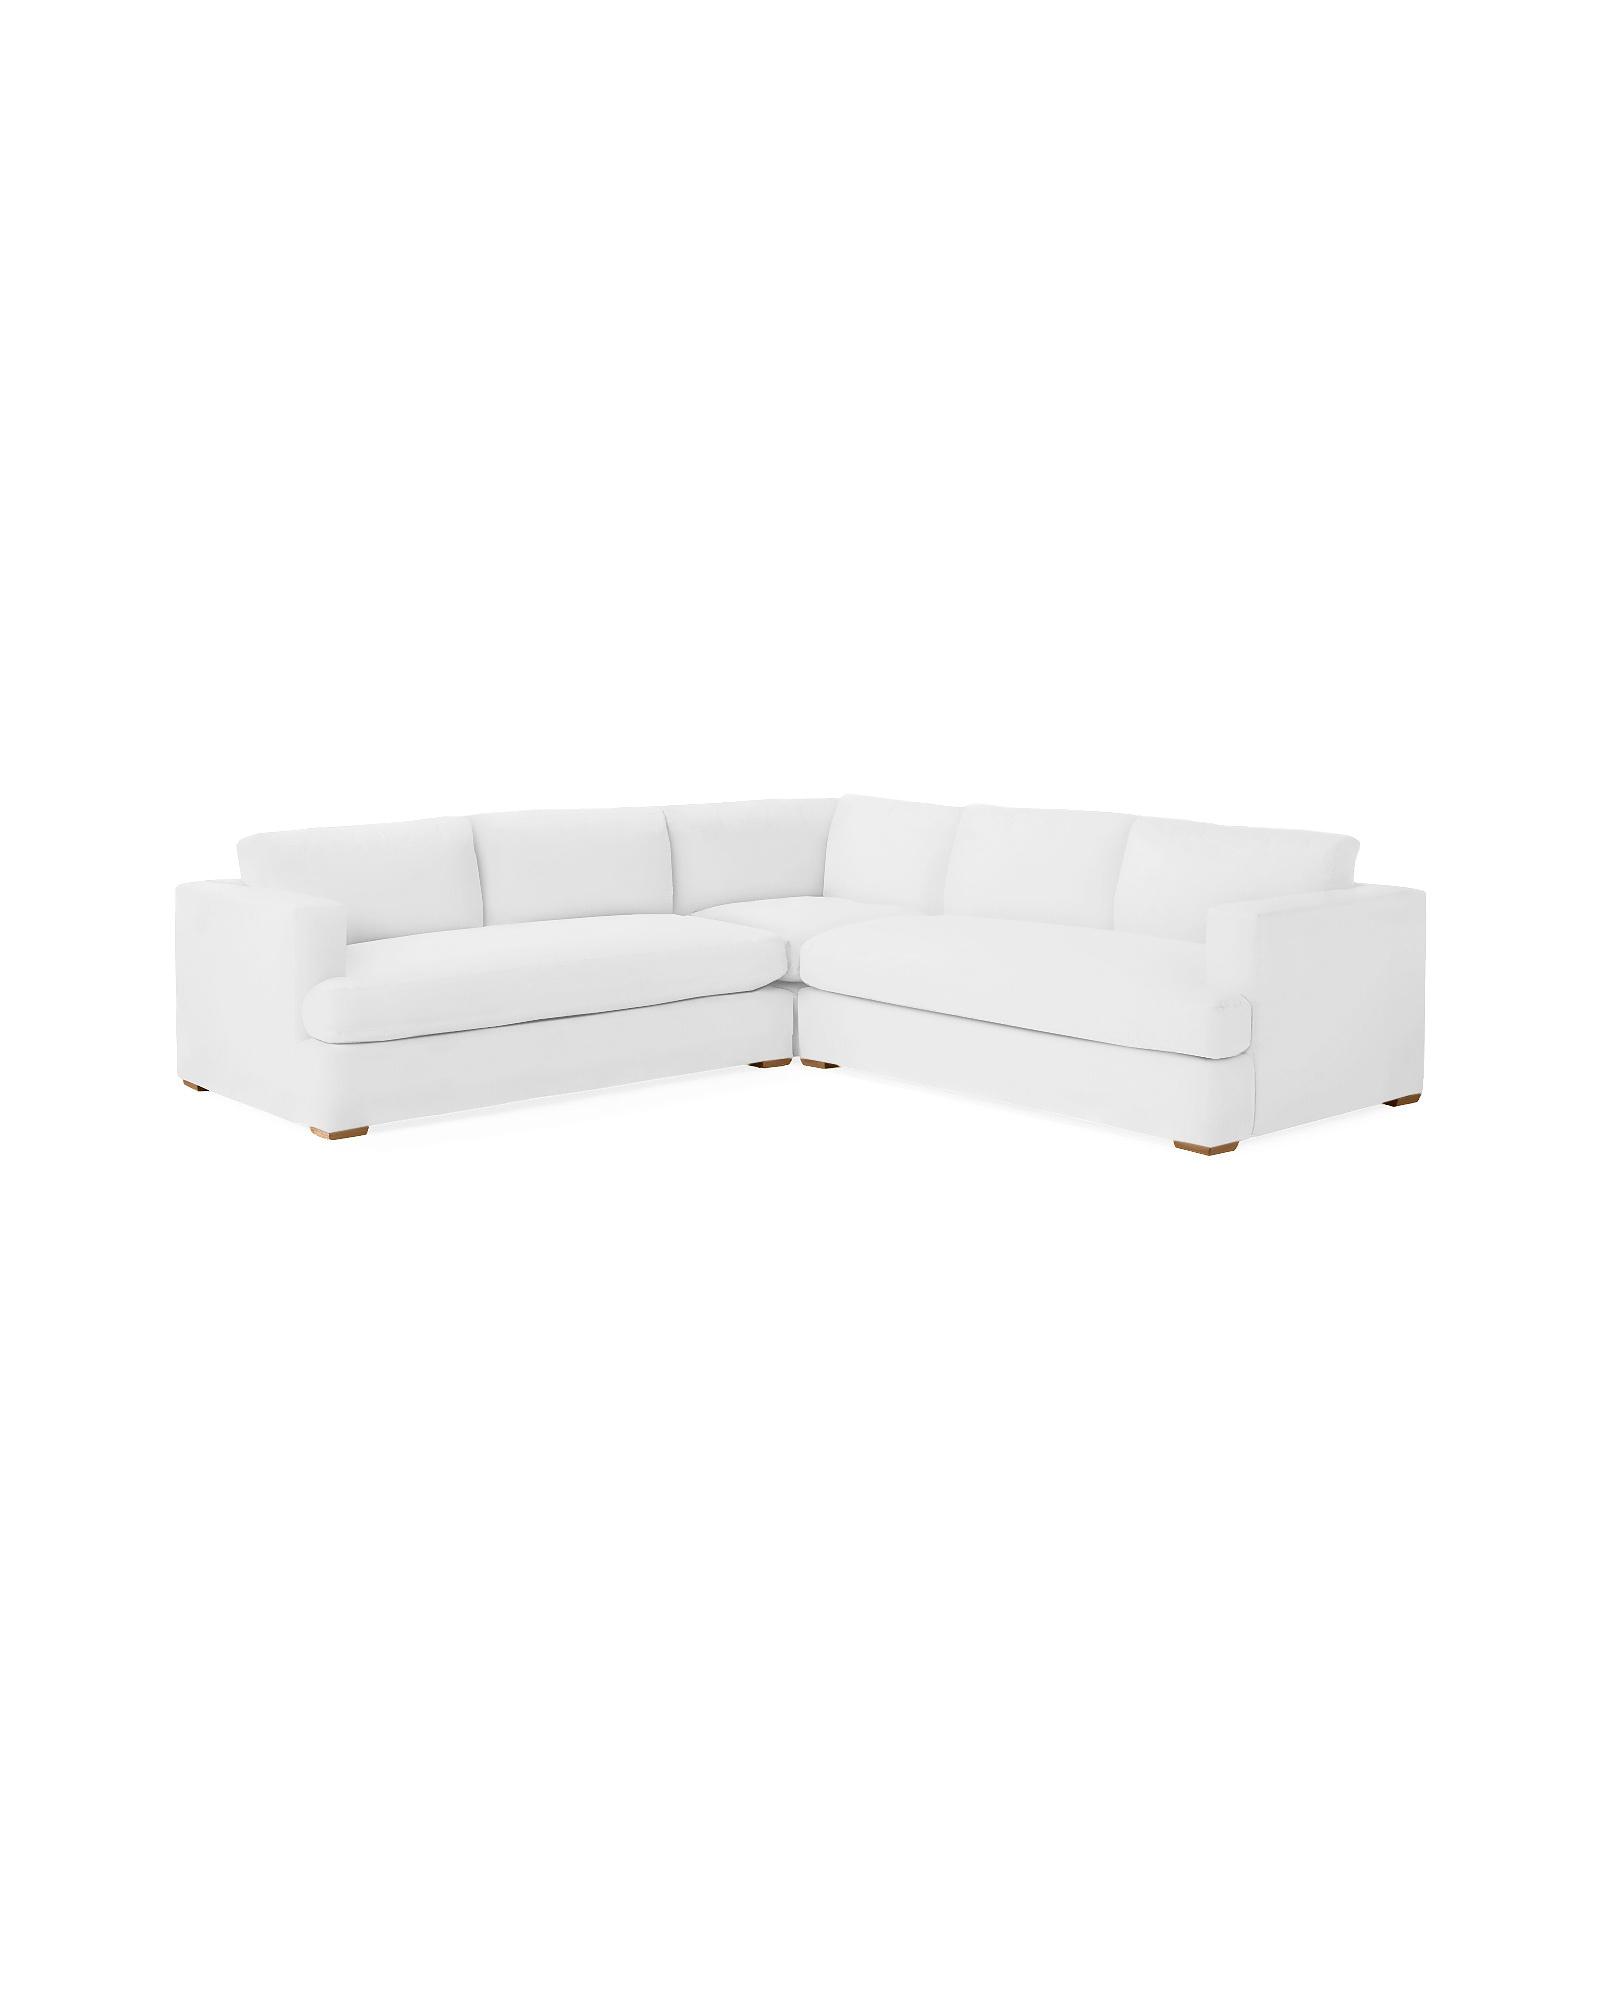 Norfolk Corner Sectional | Serena and Lily